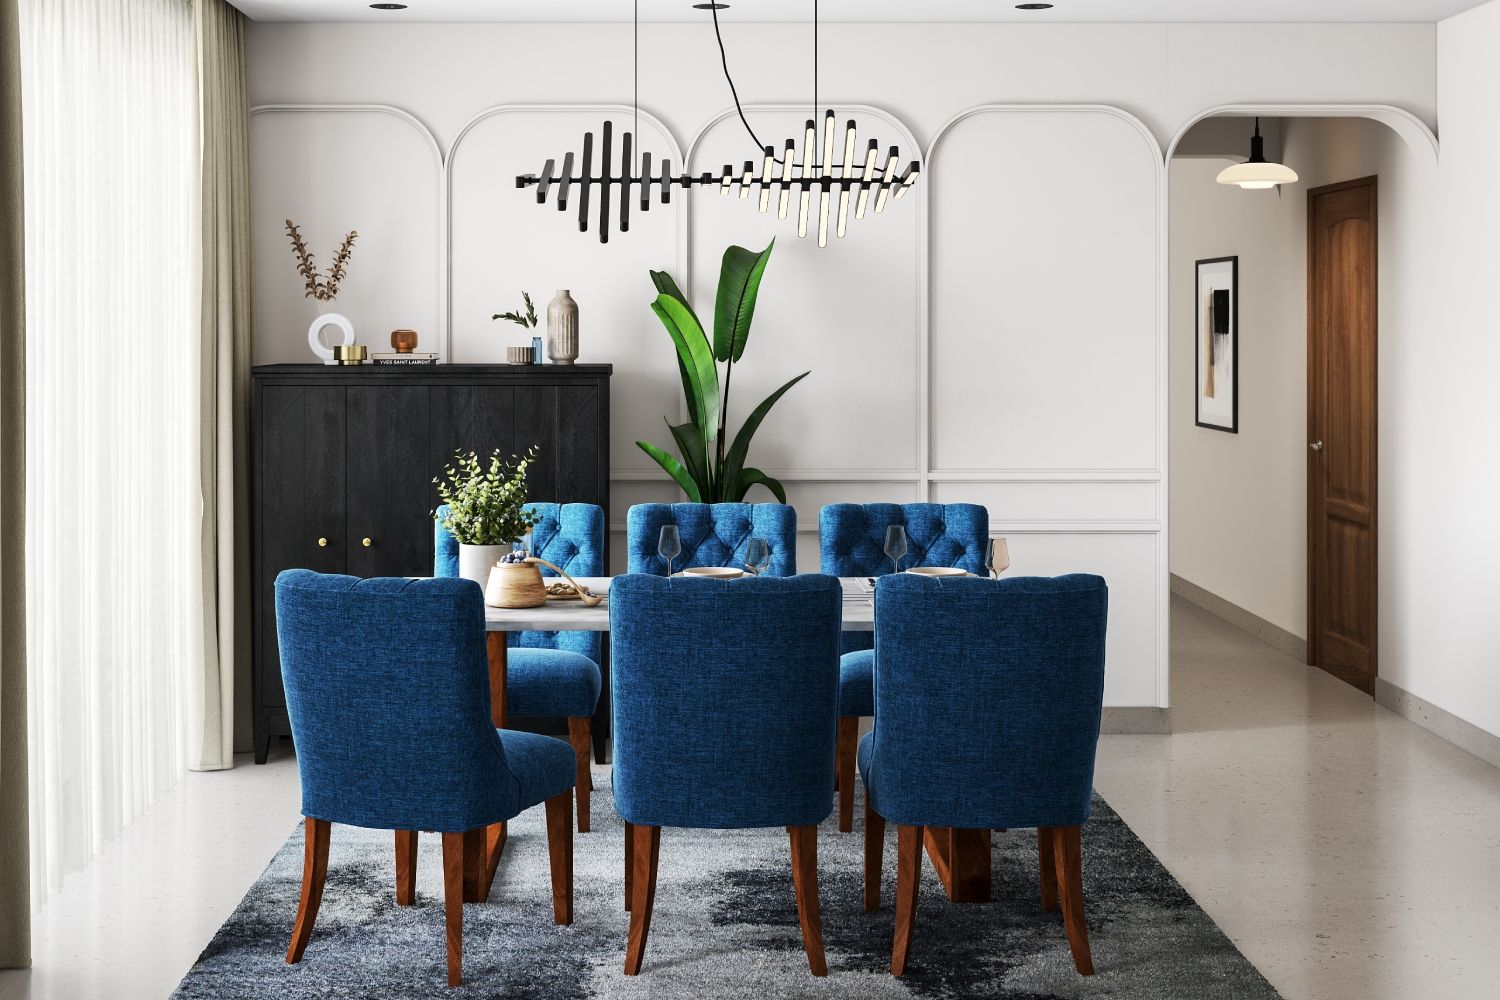 Modern 6-Seater Dining Room Design With Blue Upholstered Chairs